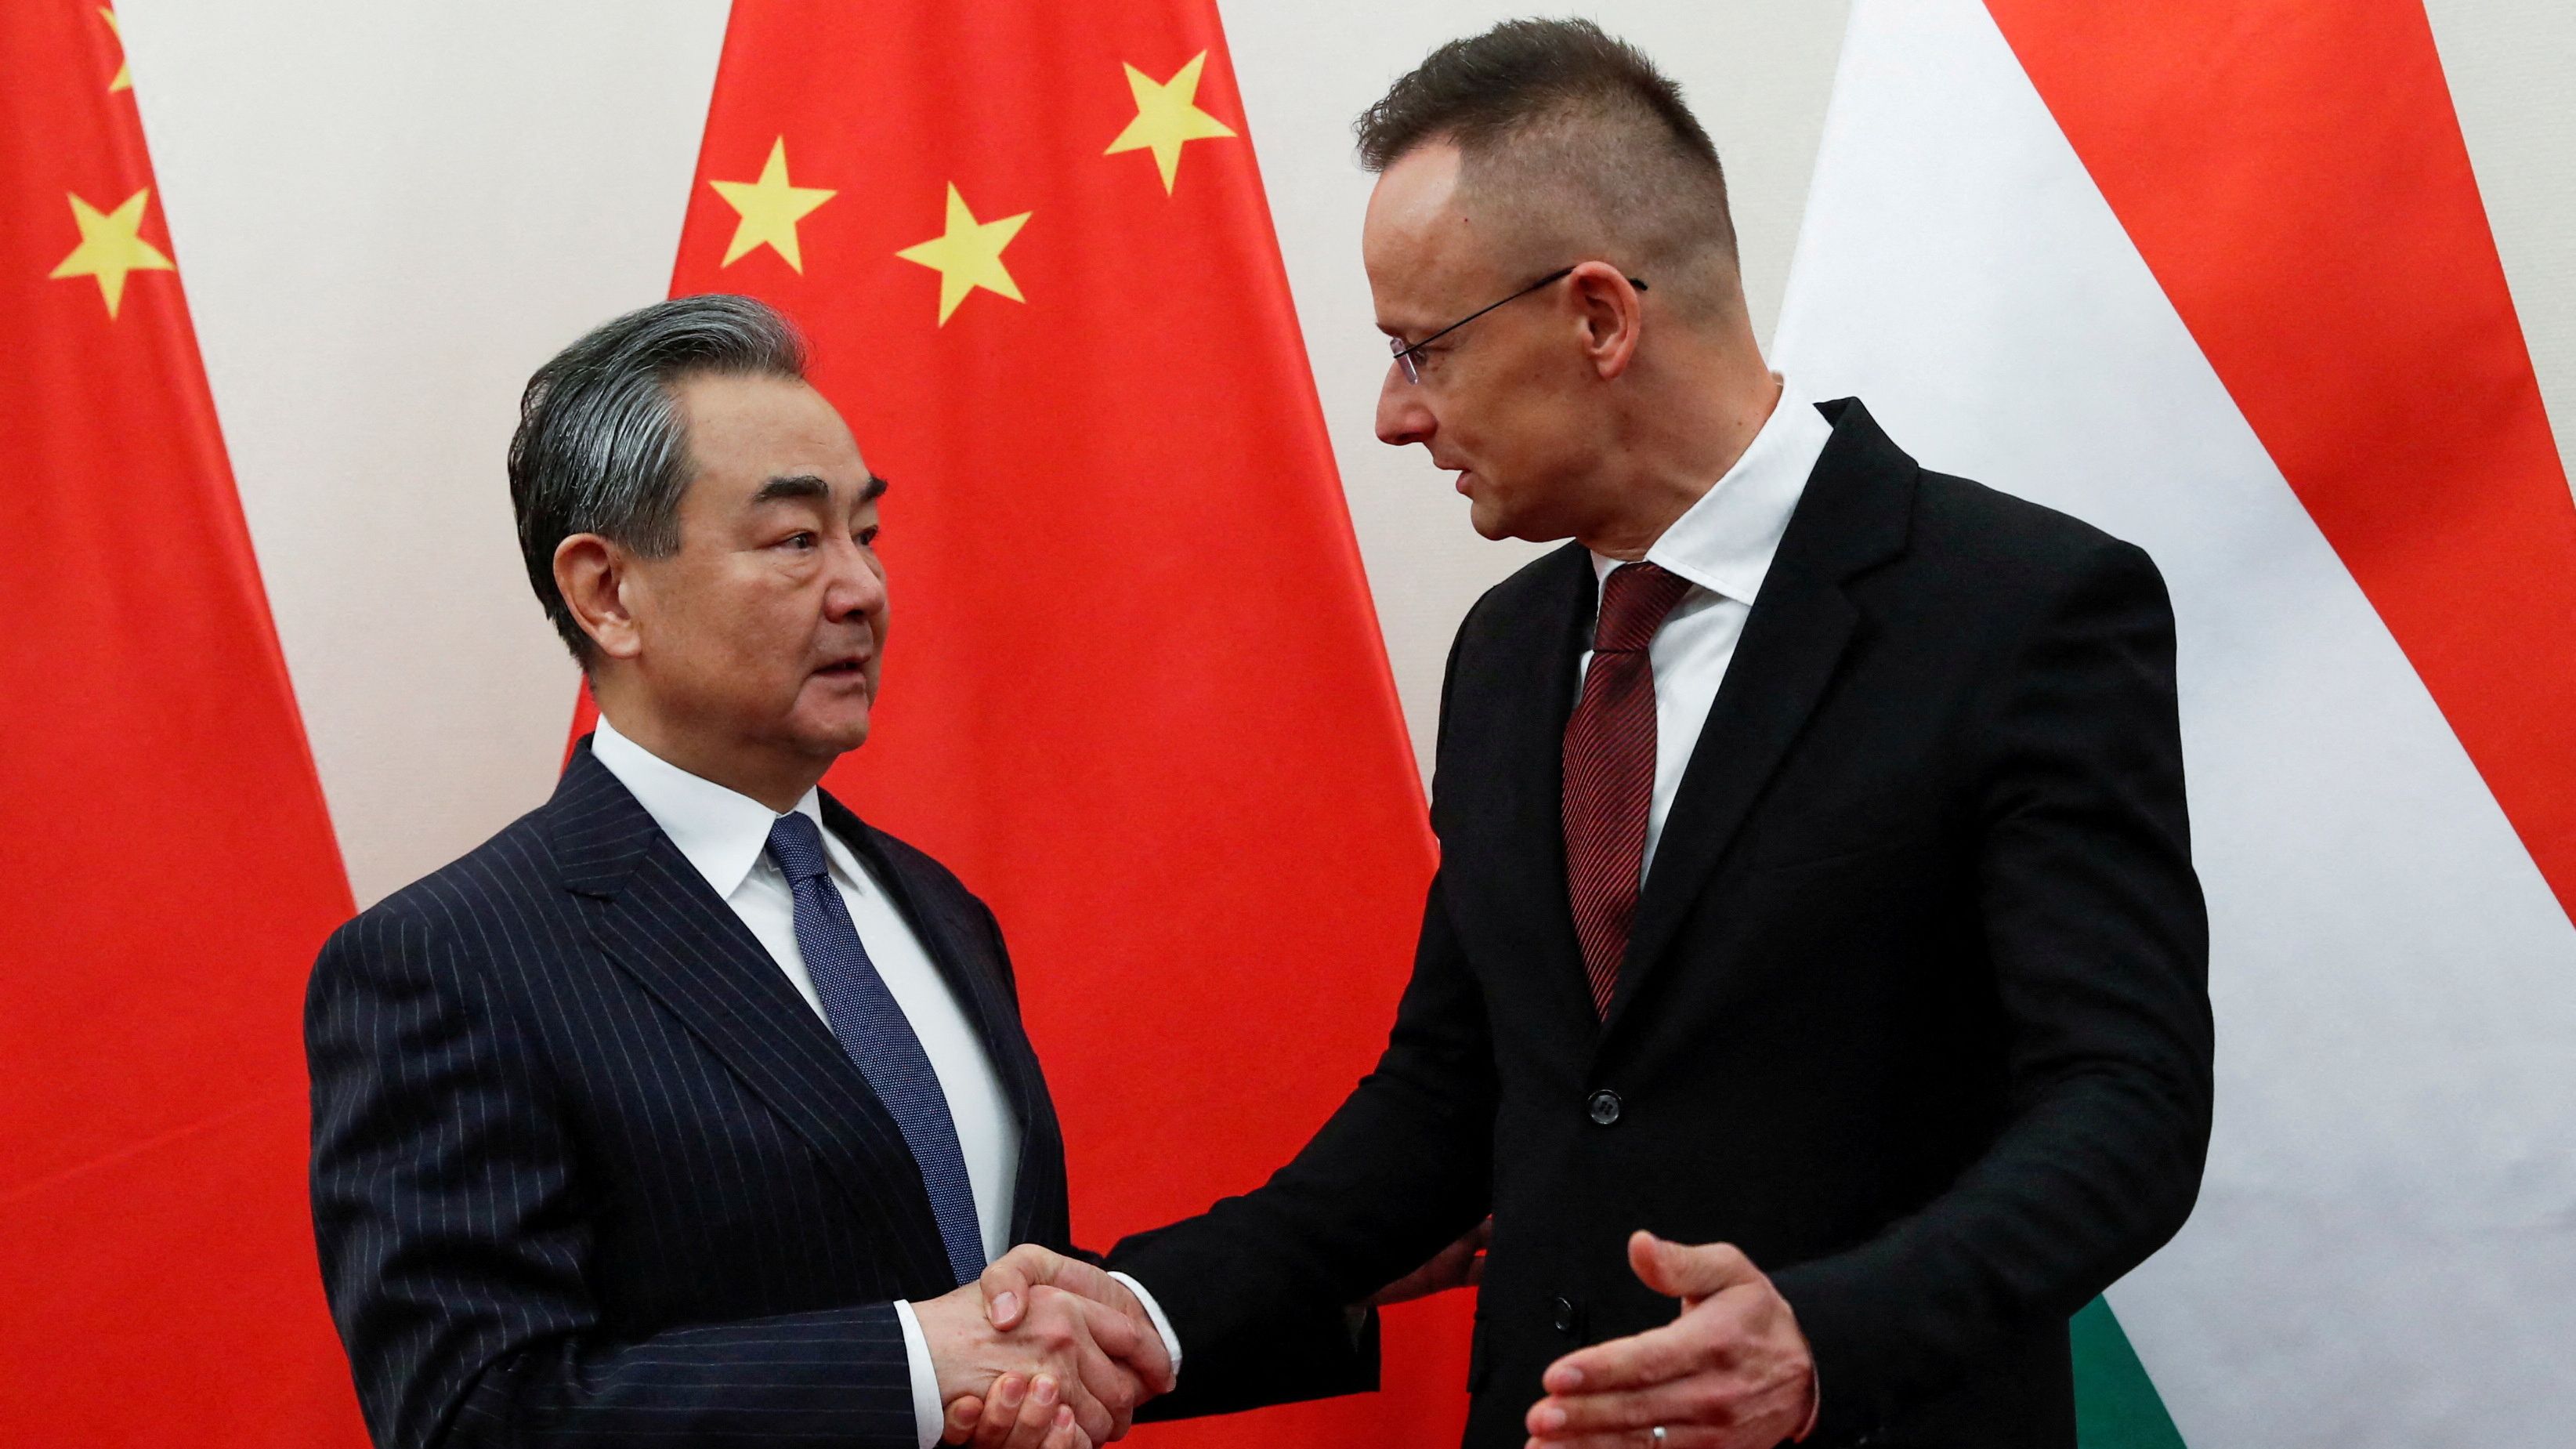 Hungary's Foreign Minister Peter Szijjarto (right) thanked China for their investment and support./ Bernadett Szabo/Reuters